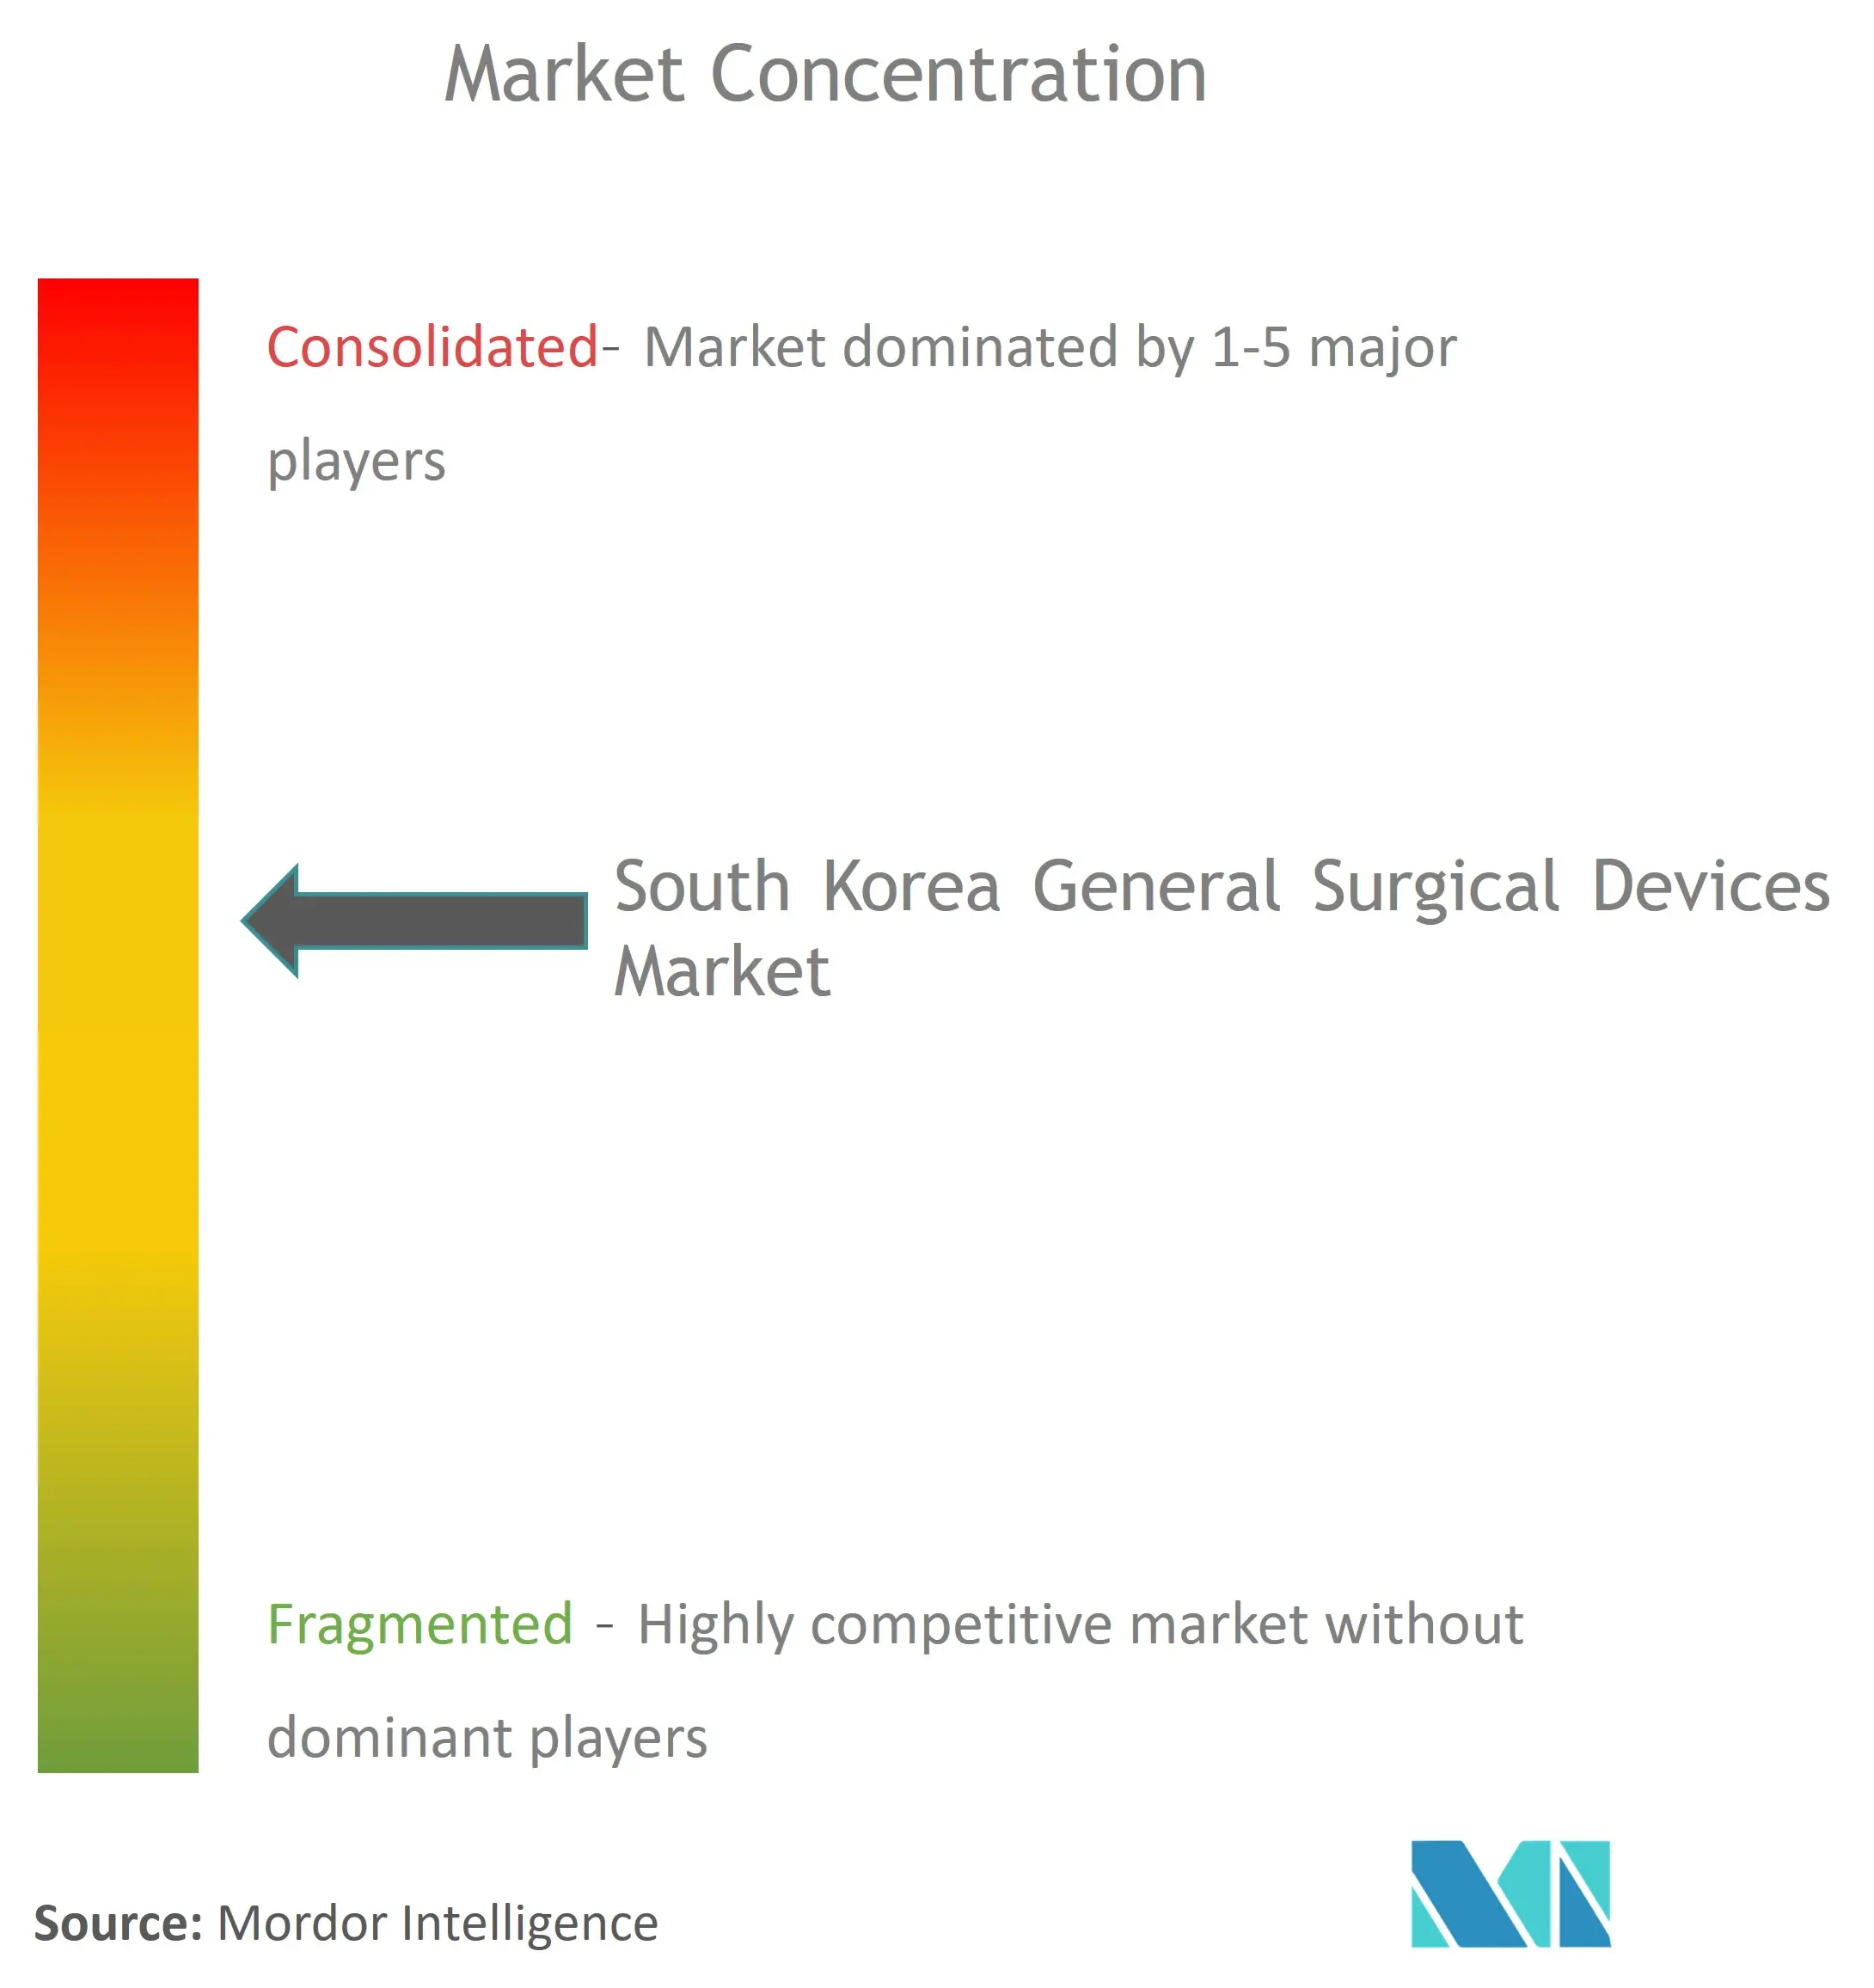 South Korea General Surgical Devices Market Concentration